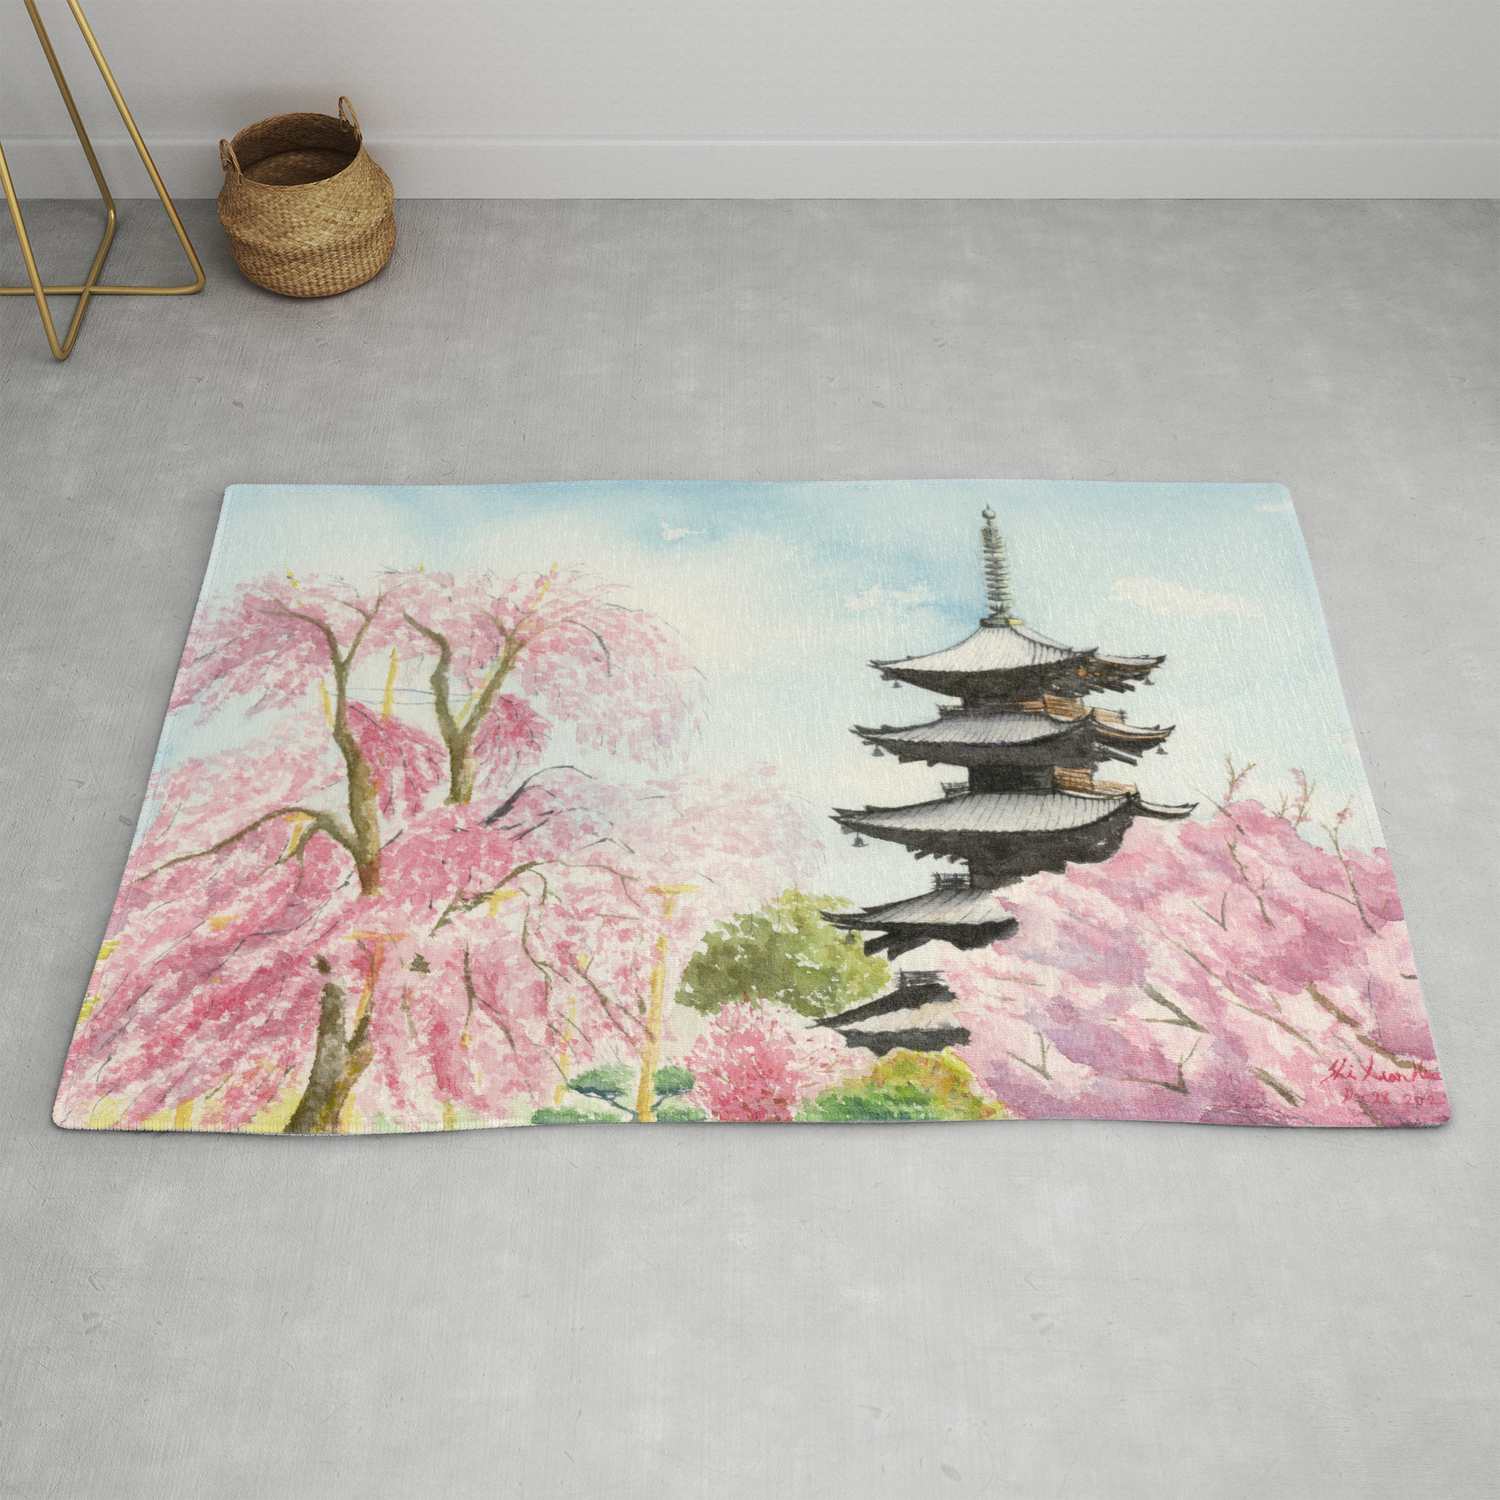 Dining Room Kitchen Rectangular Runner Ambesonne Nature Table Runner 16 X 90 Coral Black Illustration of Sakura Branches Windy April Weather in Japanese Painting Style Art